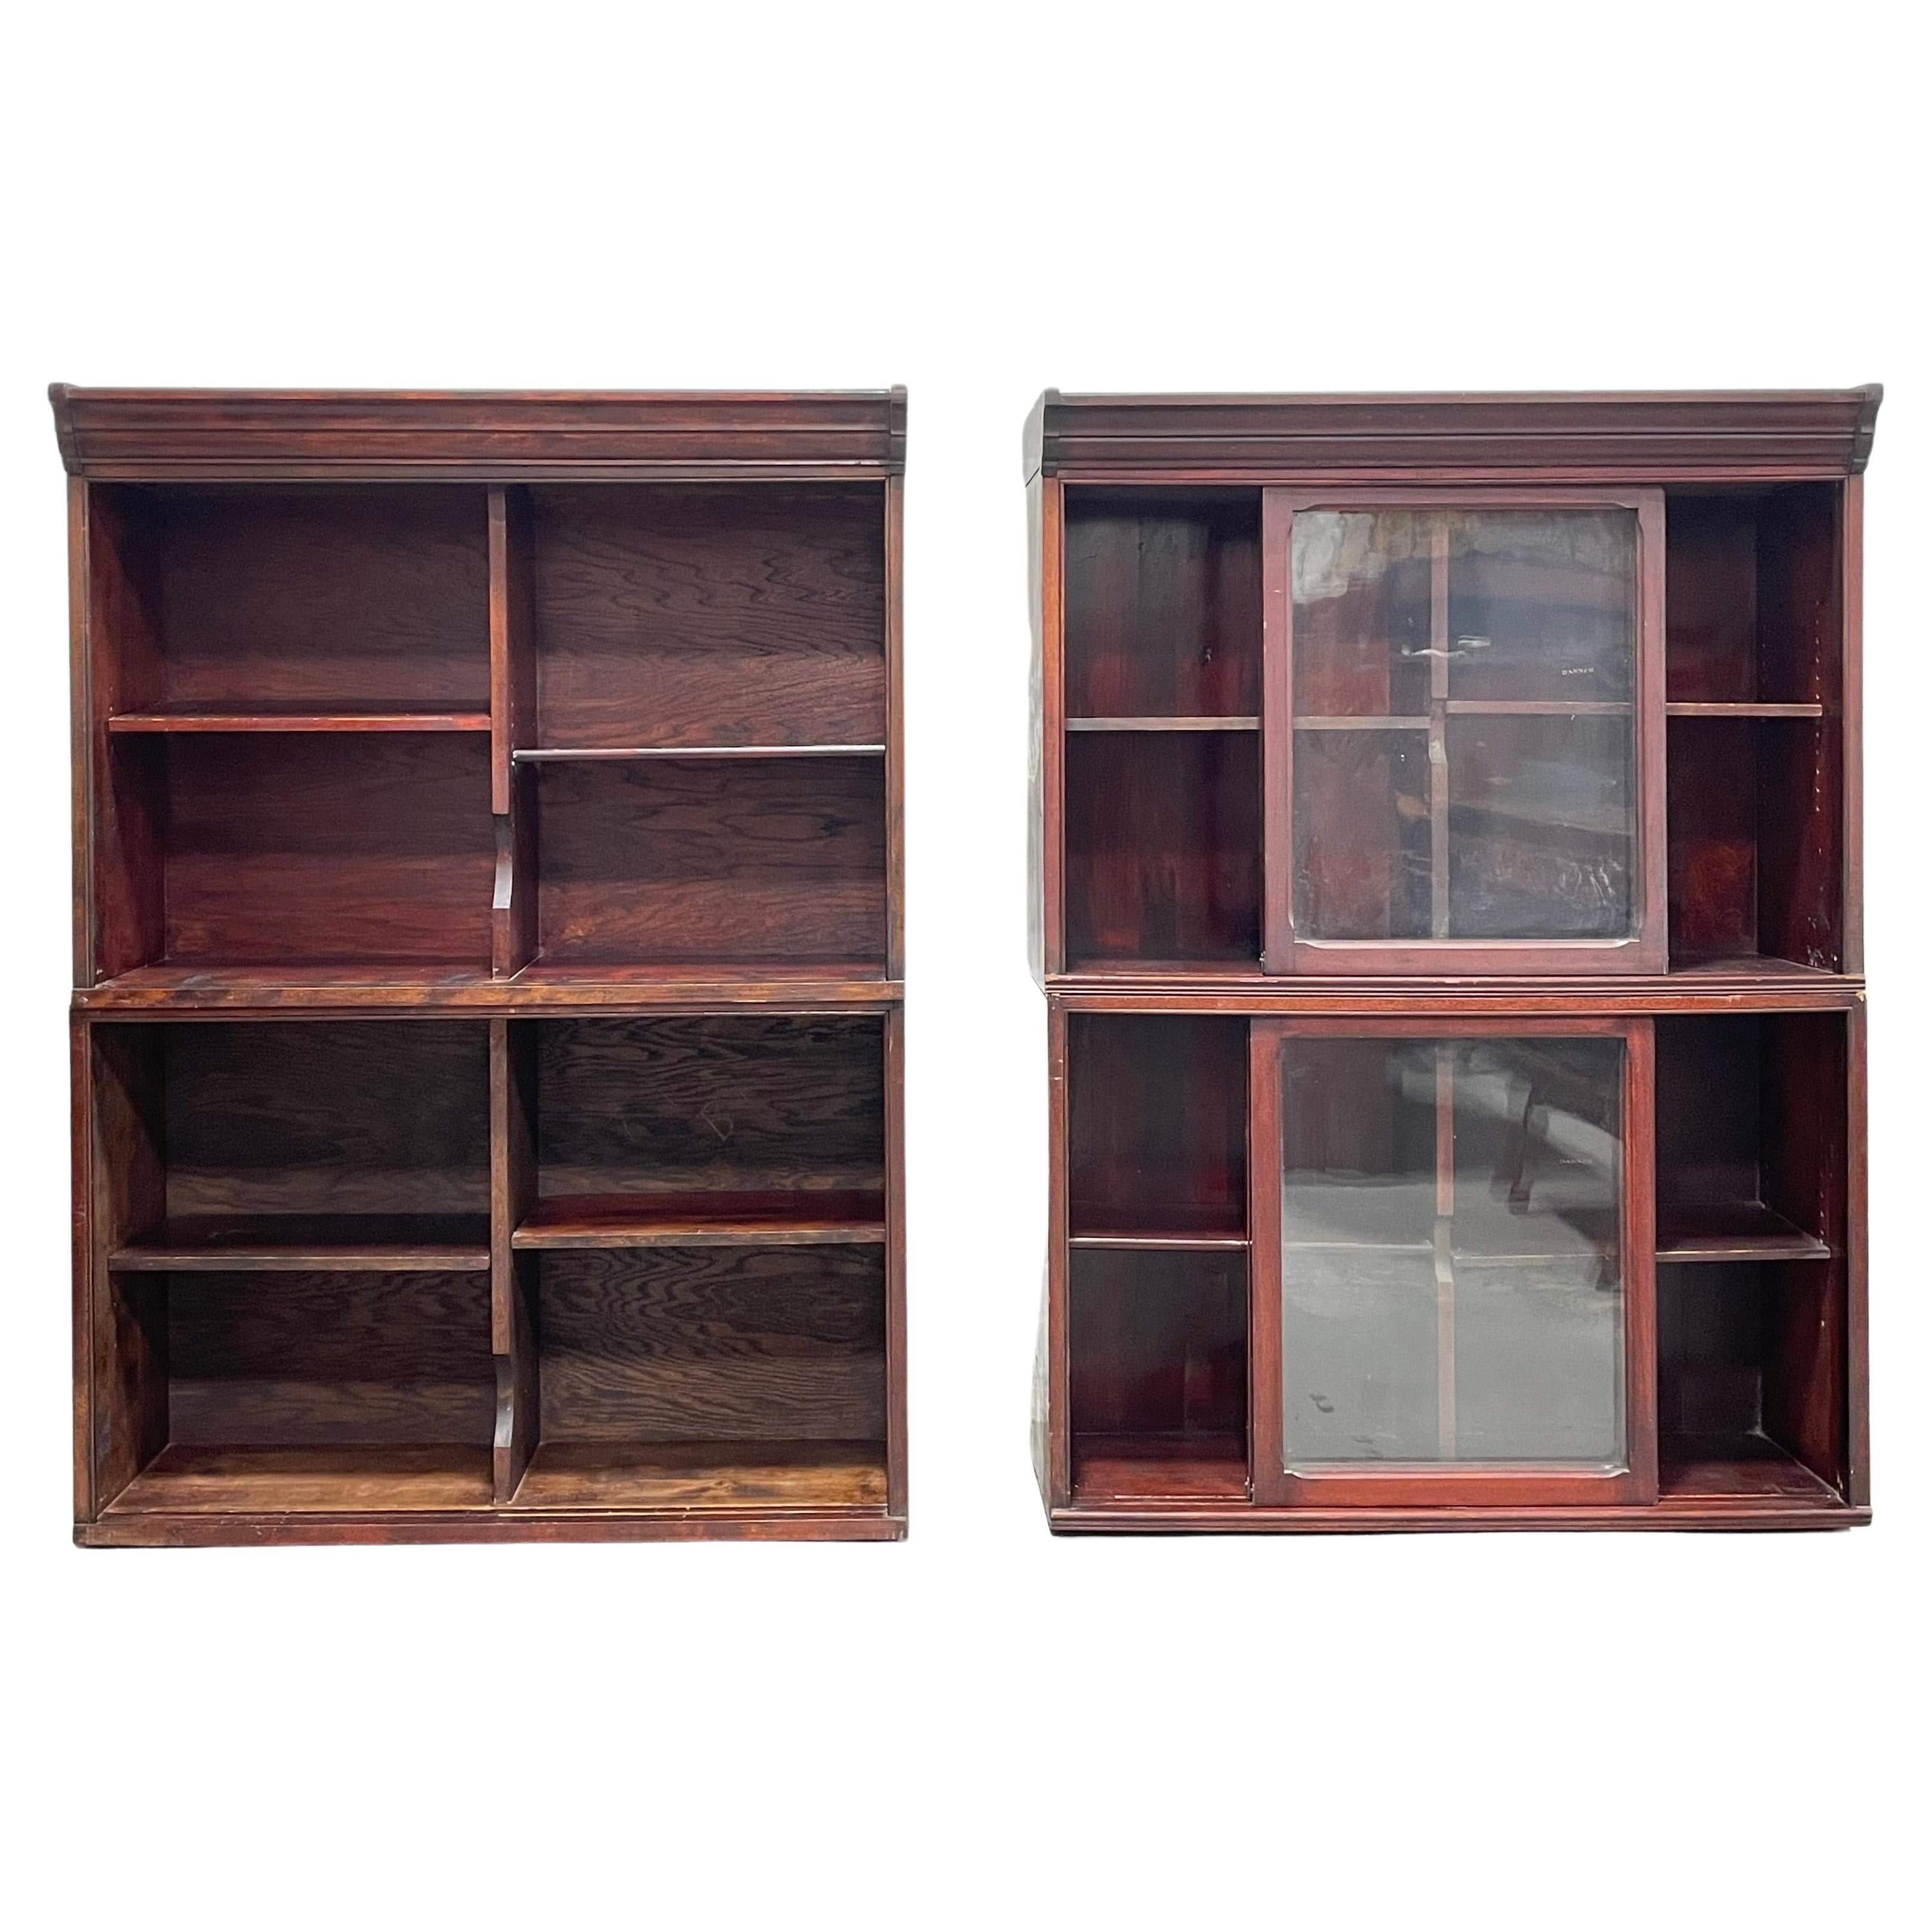 Pair of Antique Oak Bookcase / China Cabinet by Danner Furniture, circa 1910s